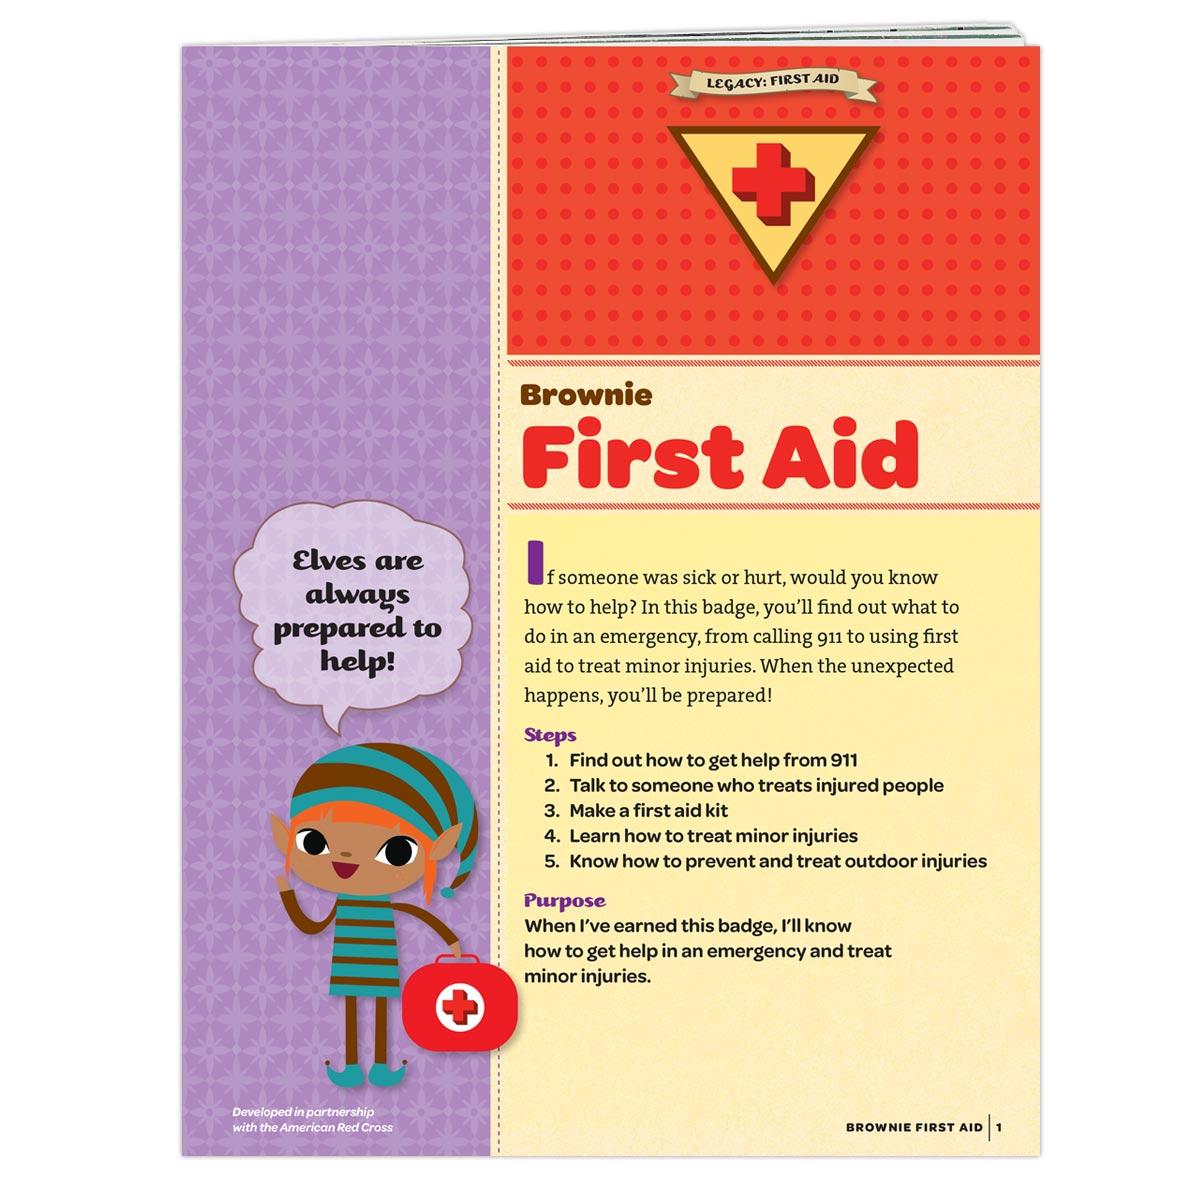 First Aid Badge Requirements Pamphlet